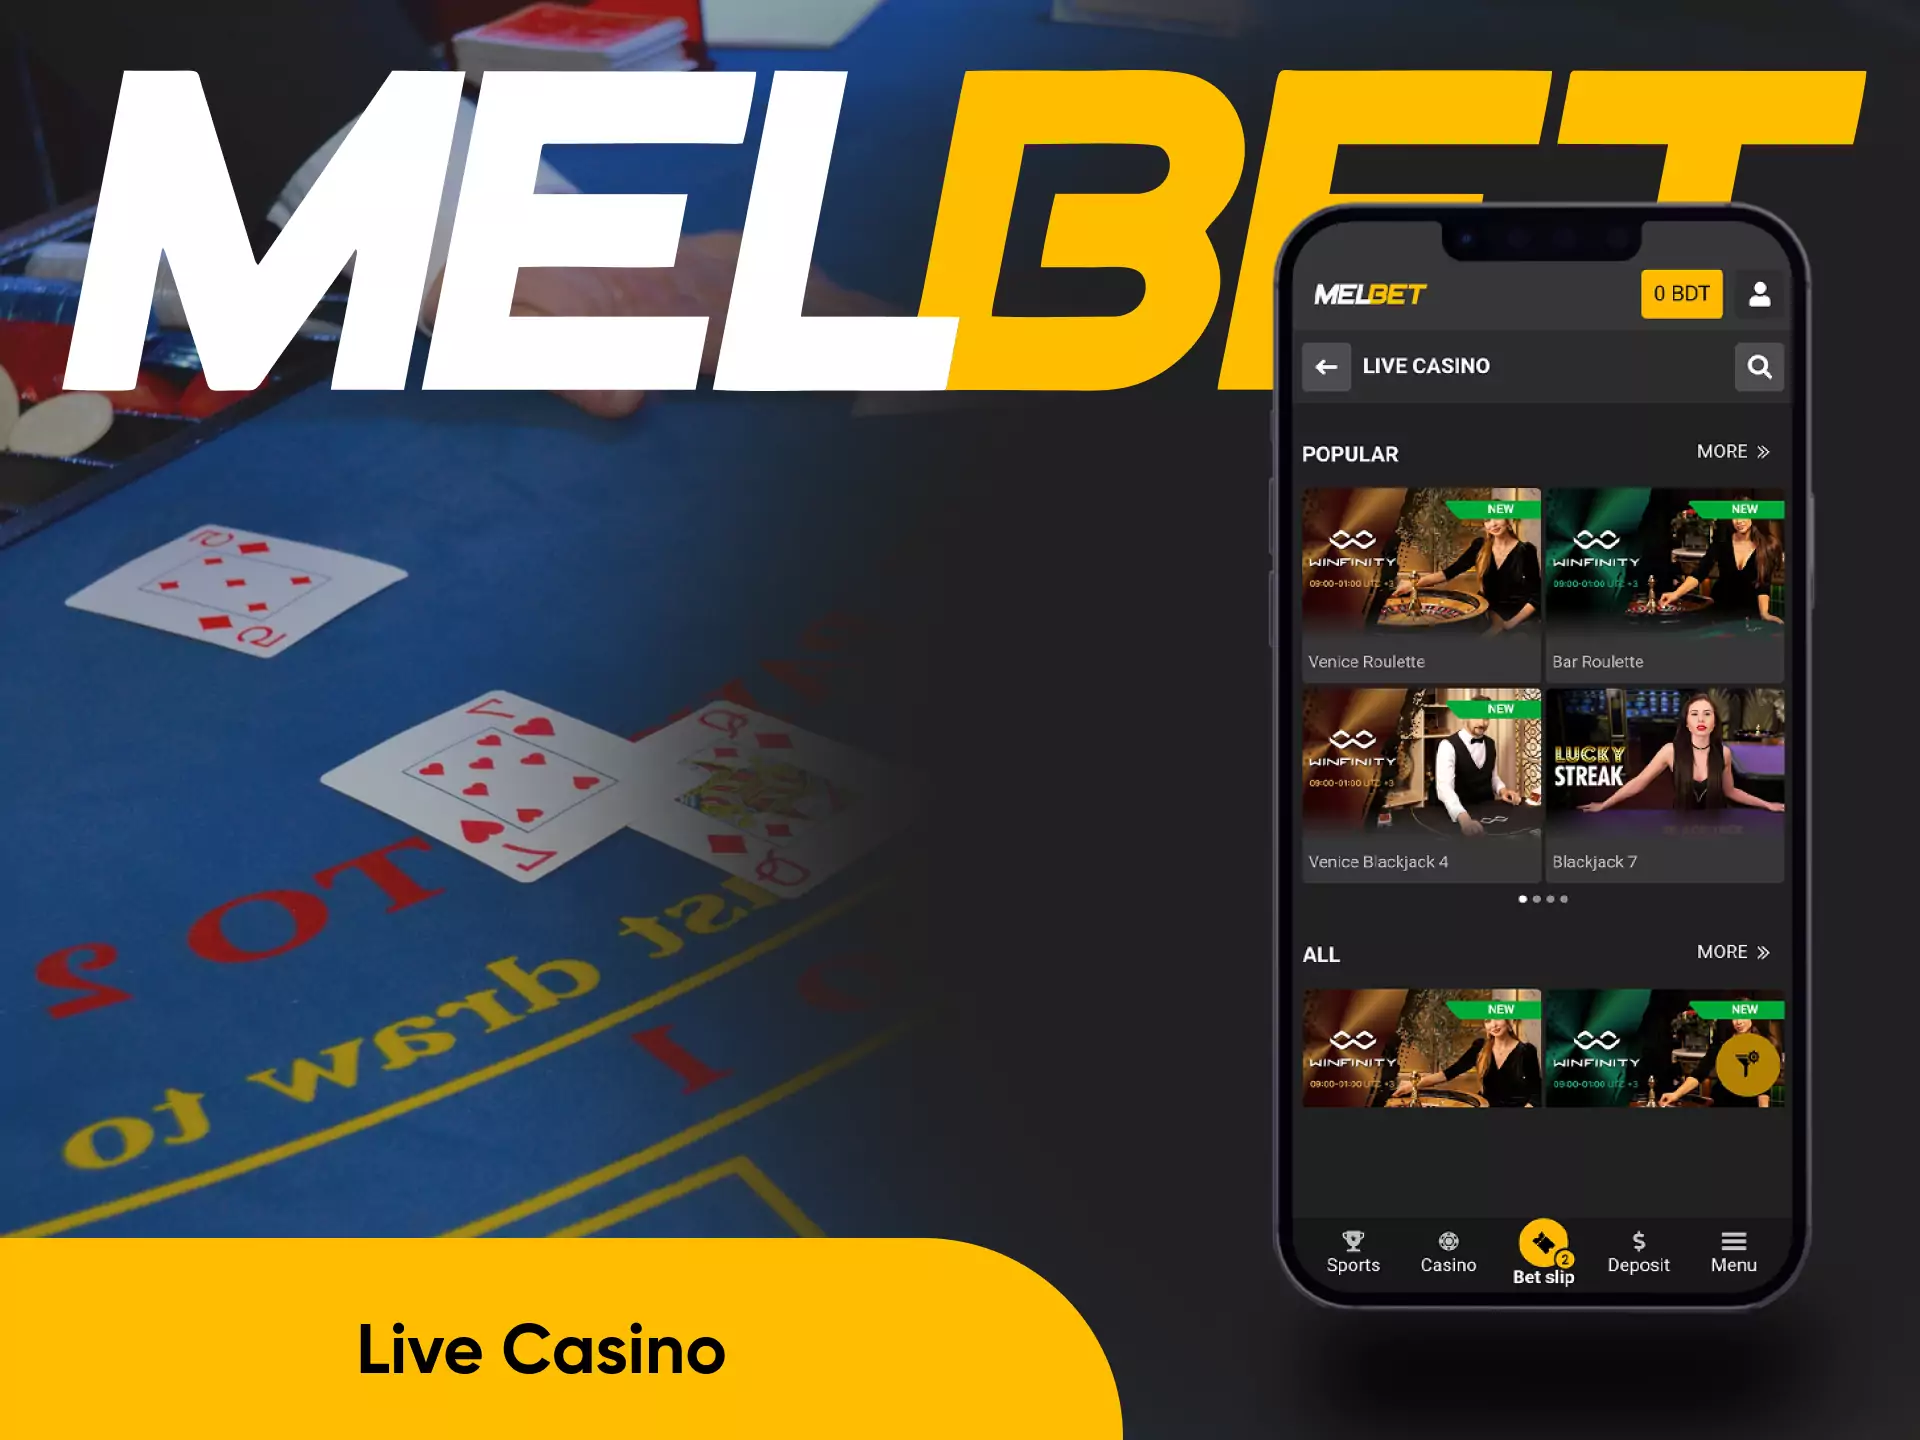 The Live Casino section of the Melbet app is presented poker, blackjack, baccarat and roulette games.